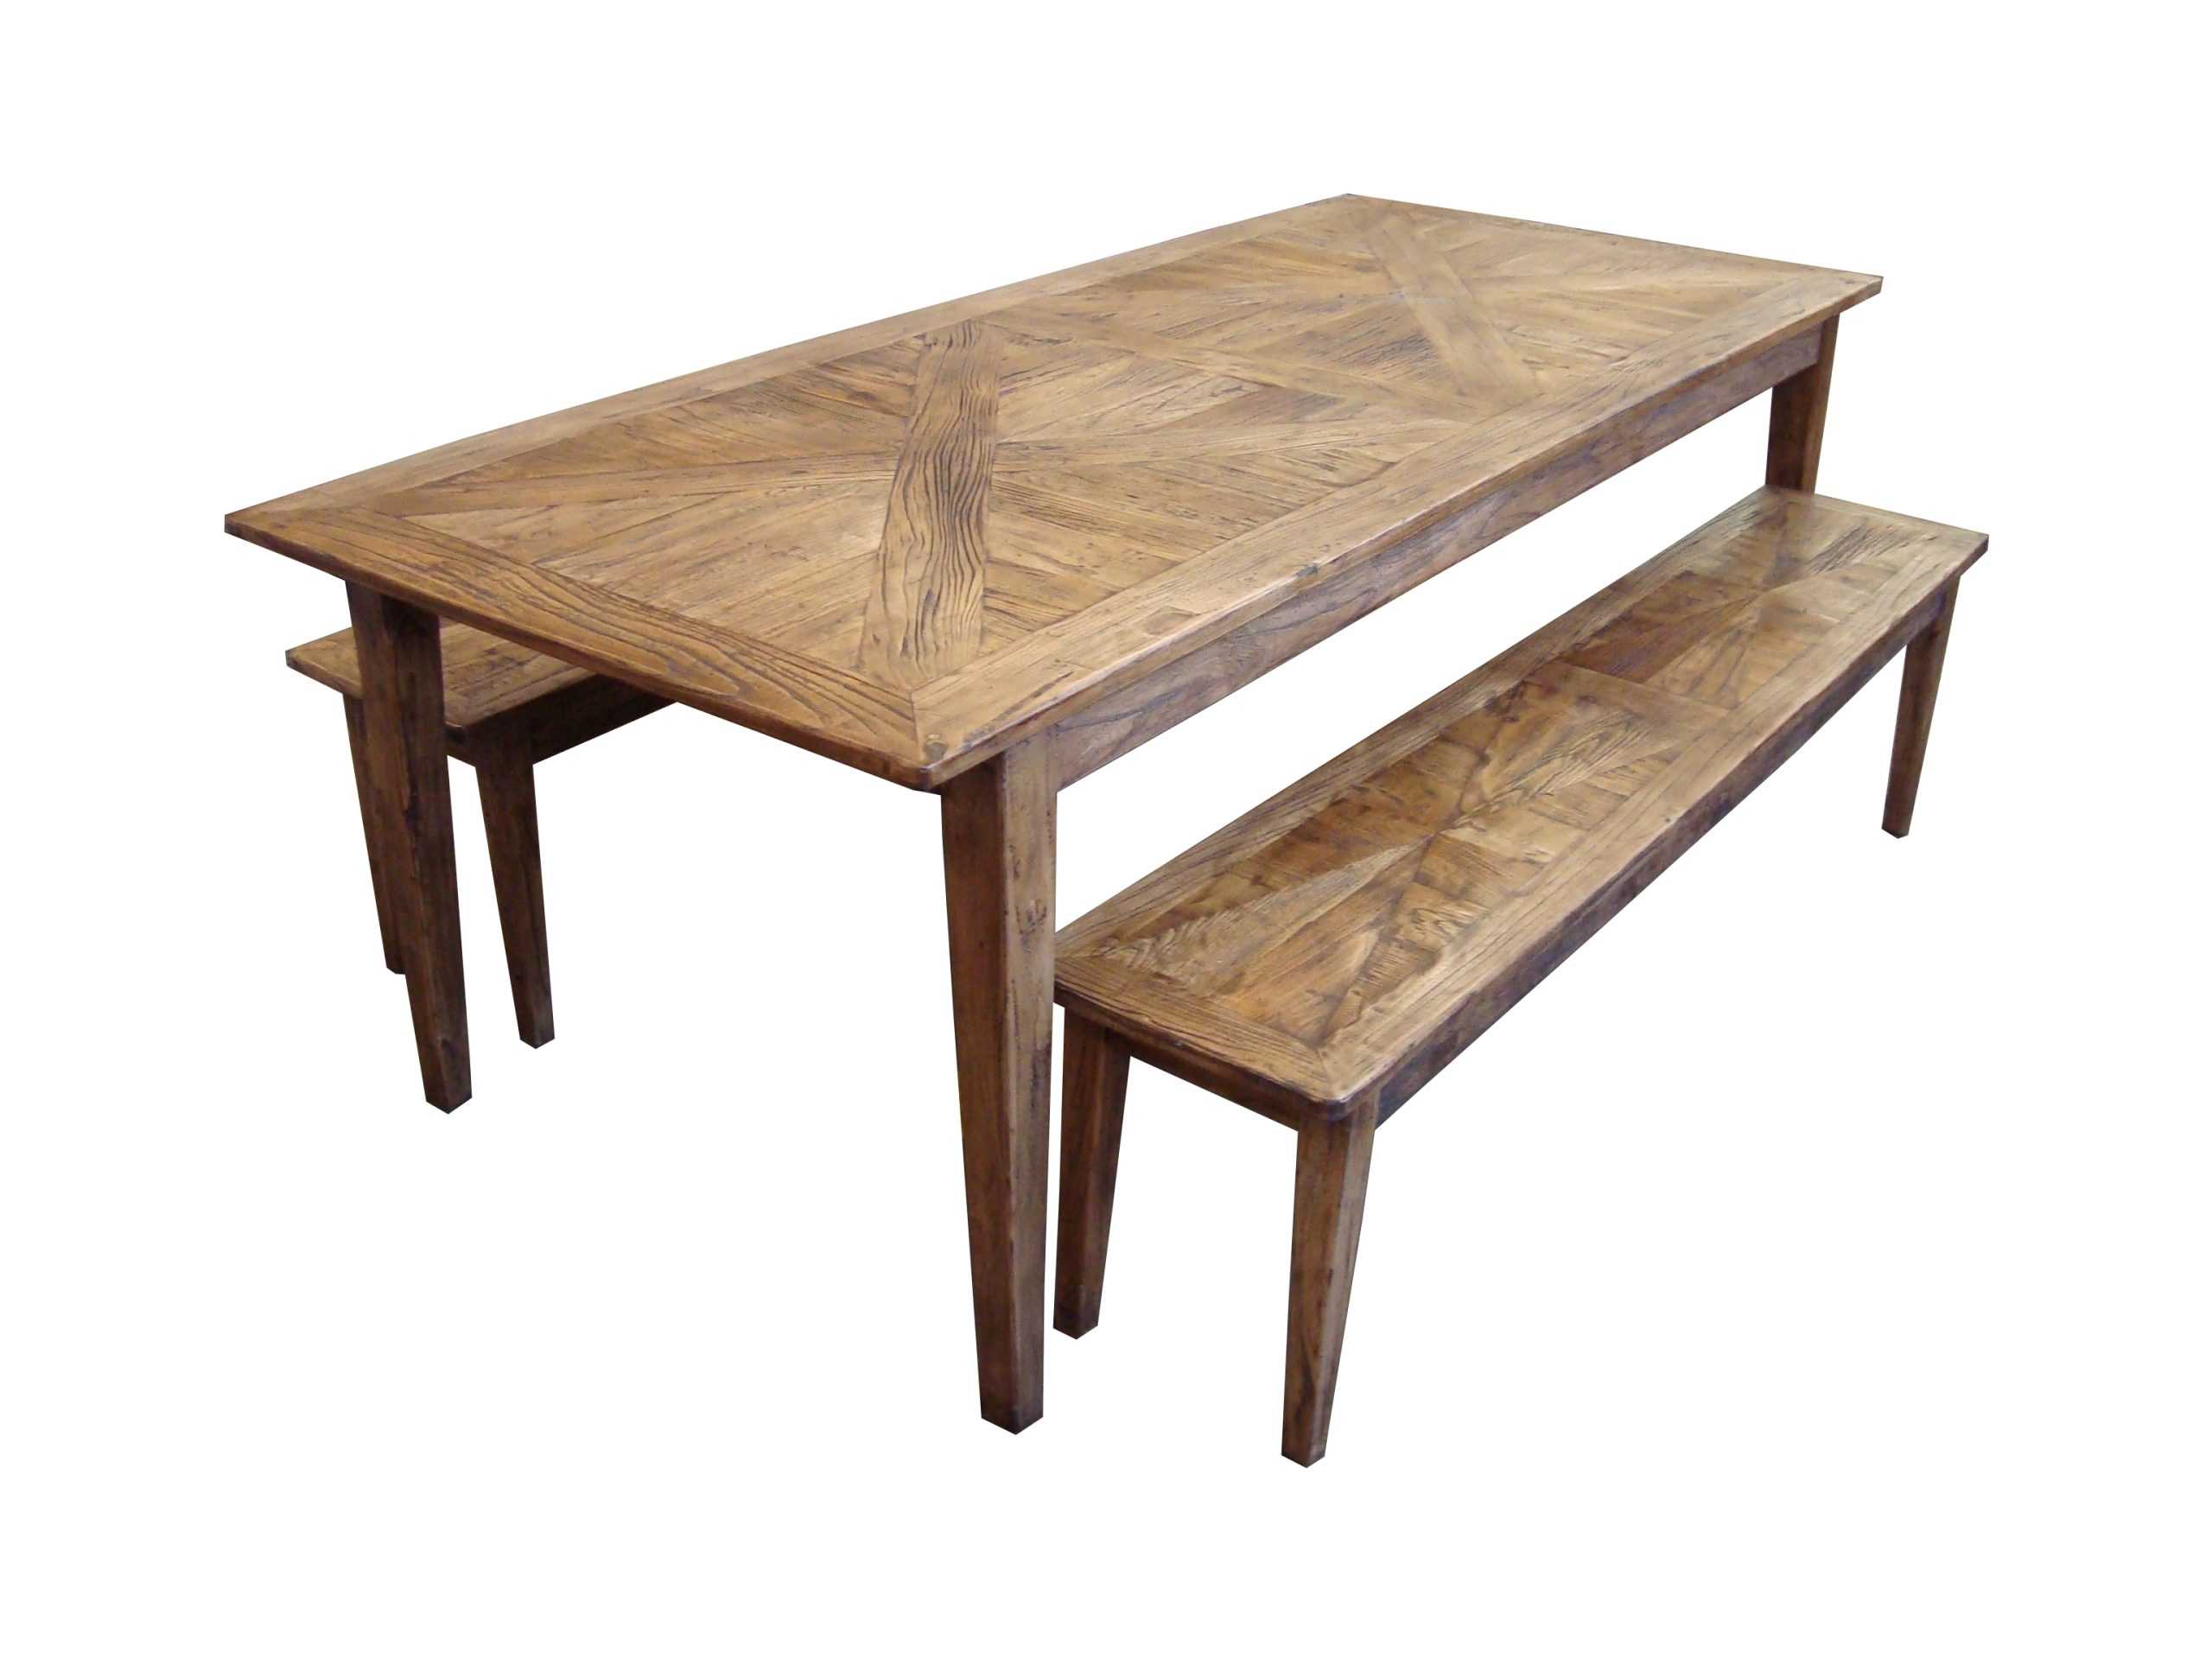 MF Parquetry Recycled Elm Timber Dining Table